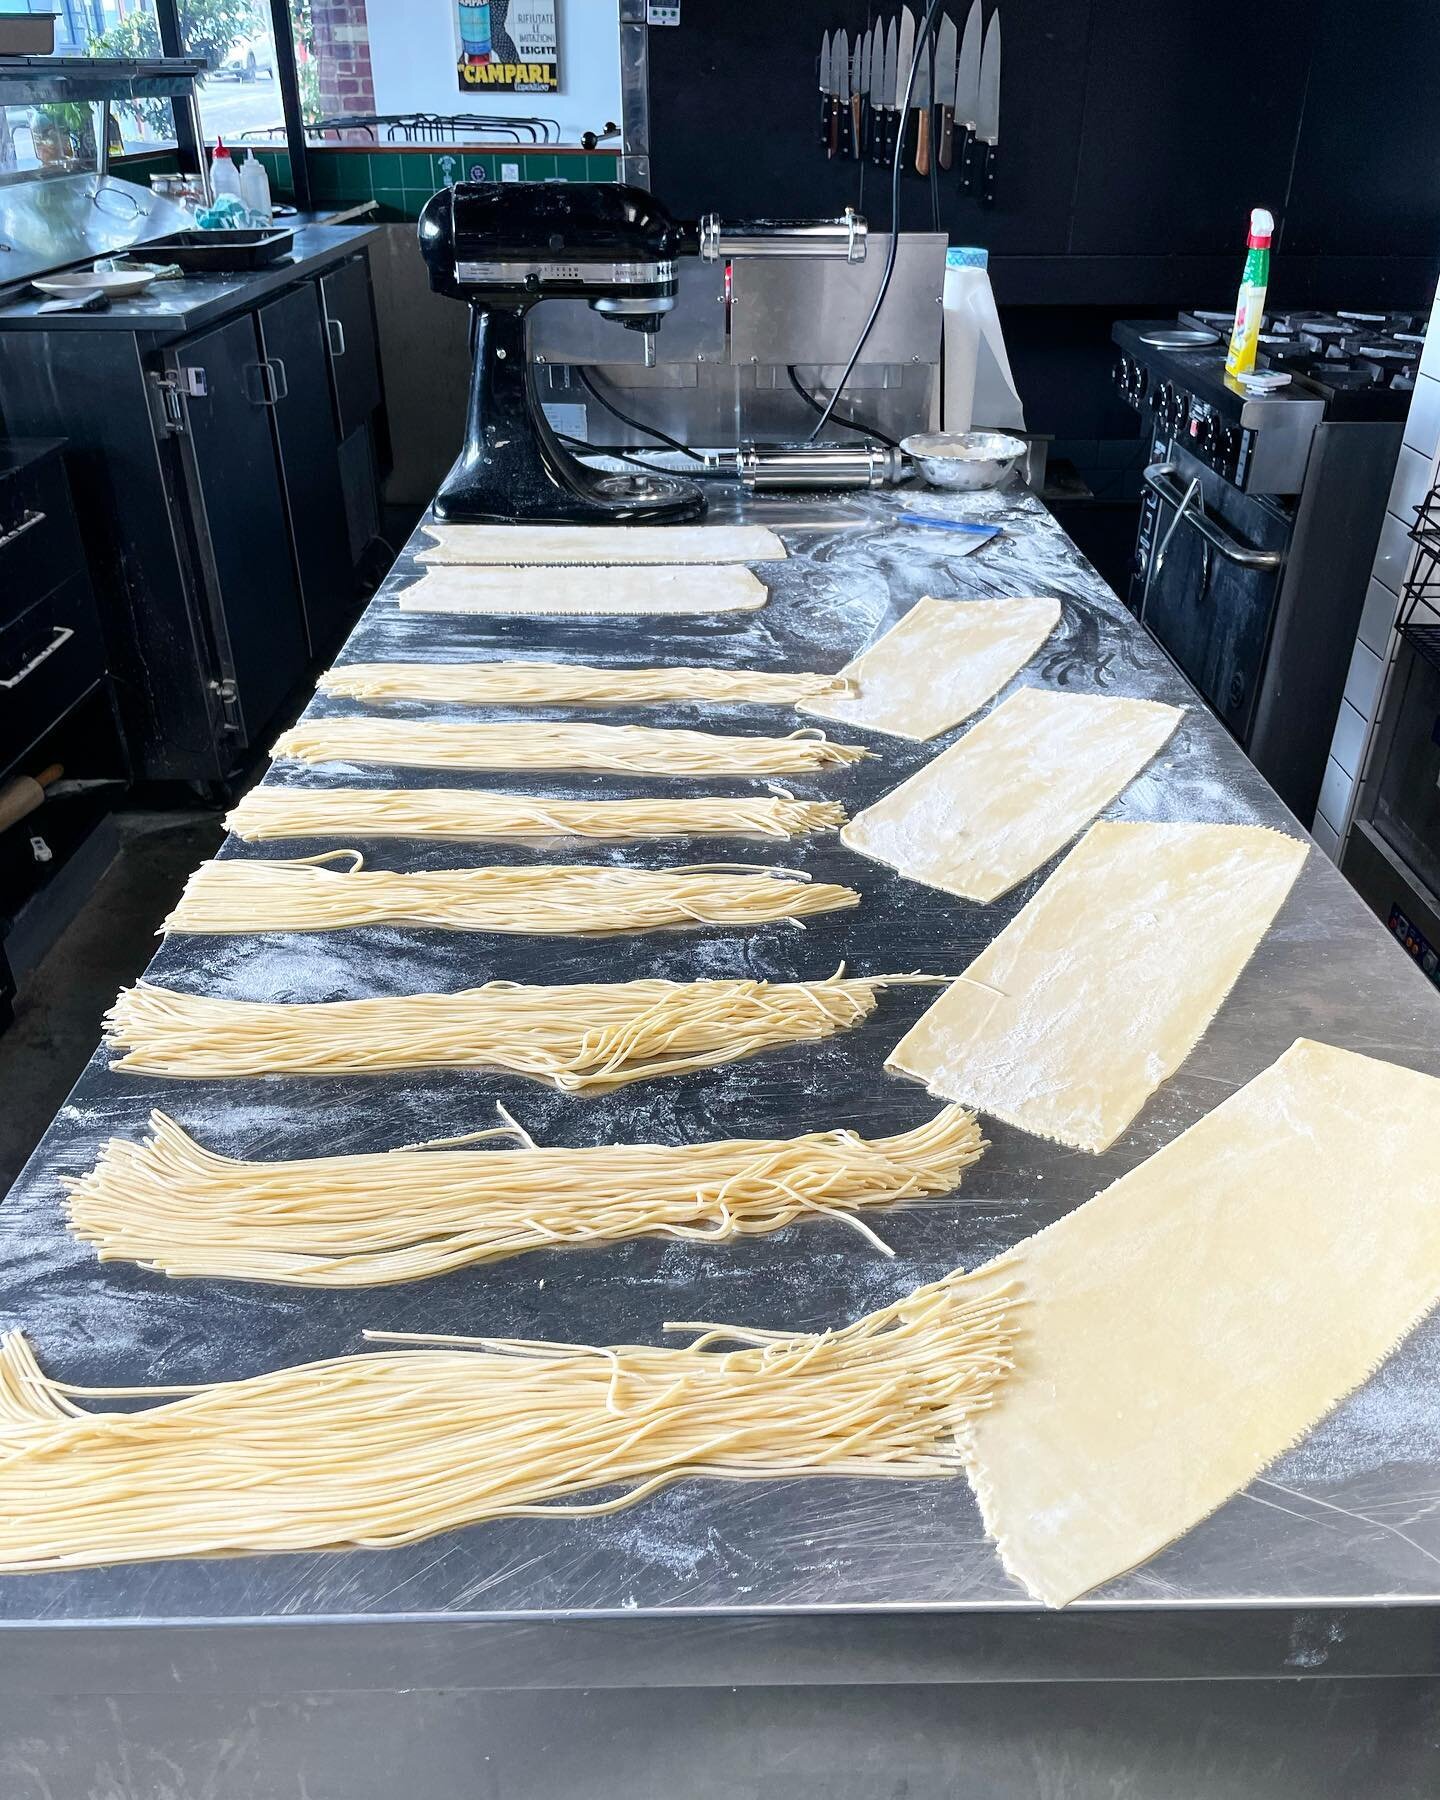 Lots of pizza, still quite a bit of pasta 🍕🤝🍝 all house made, all the time #panandvine #adelaidepizza #pasta #kenttown